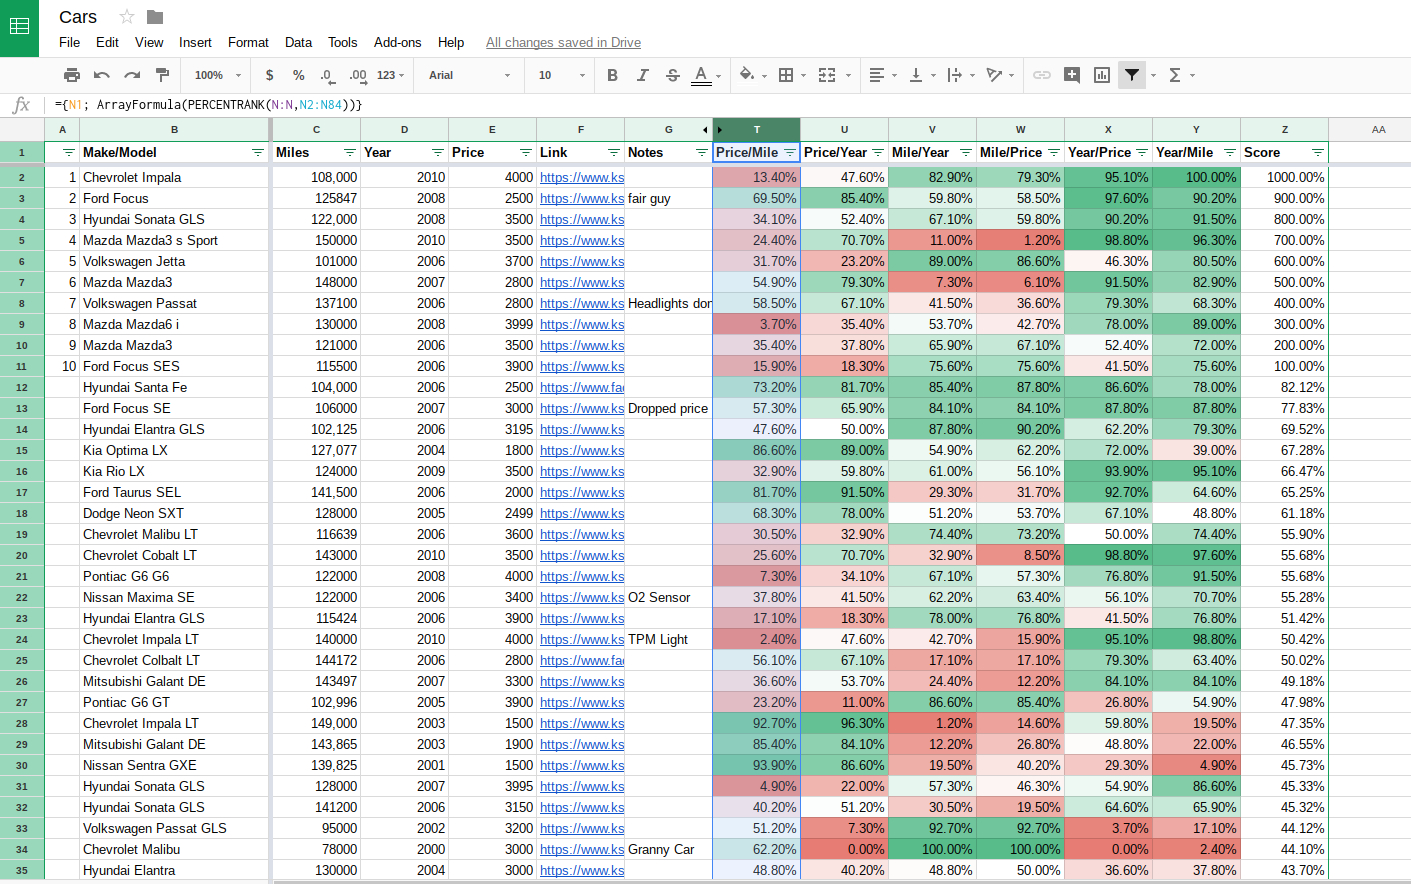 Car Comparison Spreadsheet Intended For My Crazy Car Comparison Spreadsheet. Helping Me Buy My Next Car